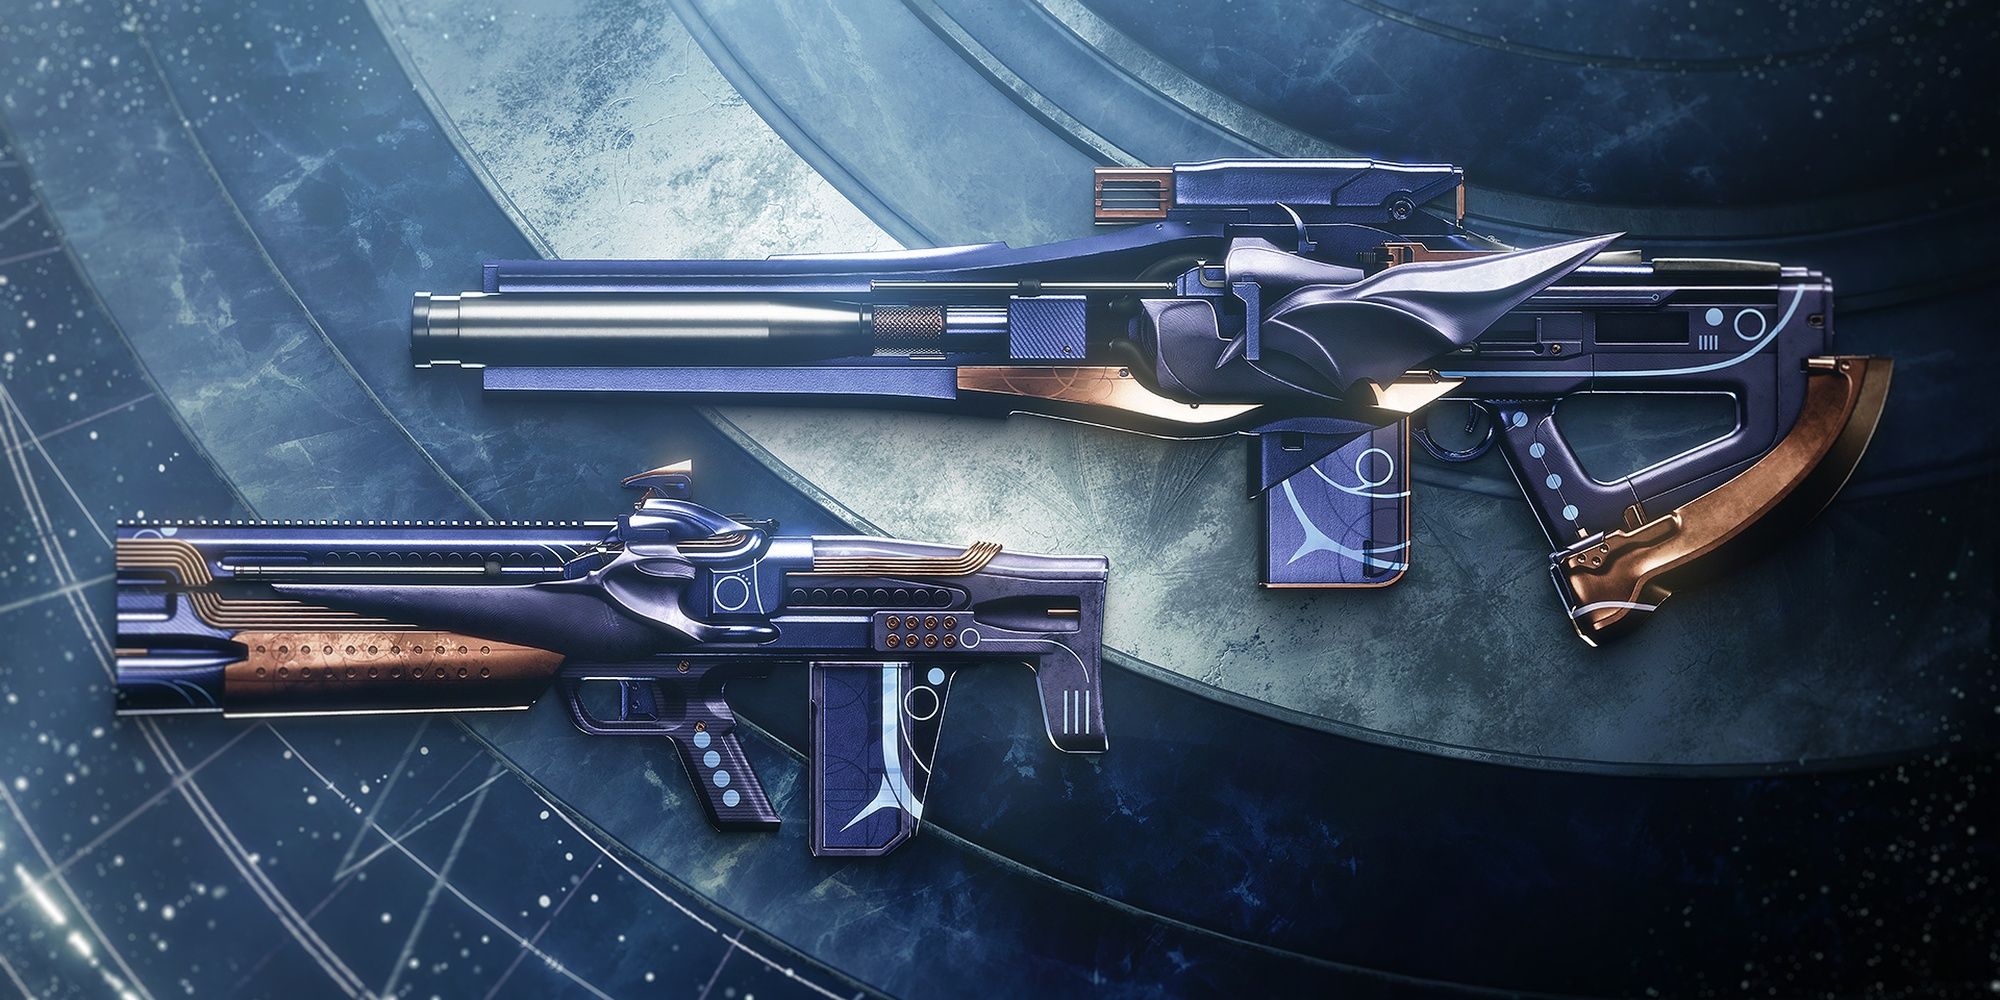 destiny 2 season of the wish seasonal weapons featuring appetence and scalar potential